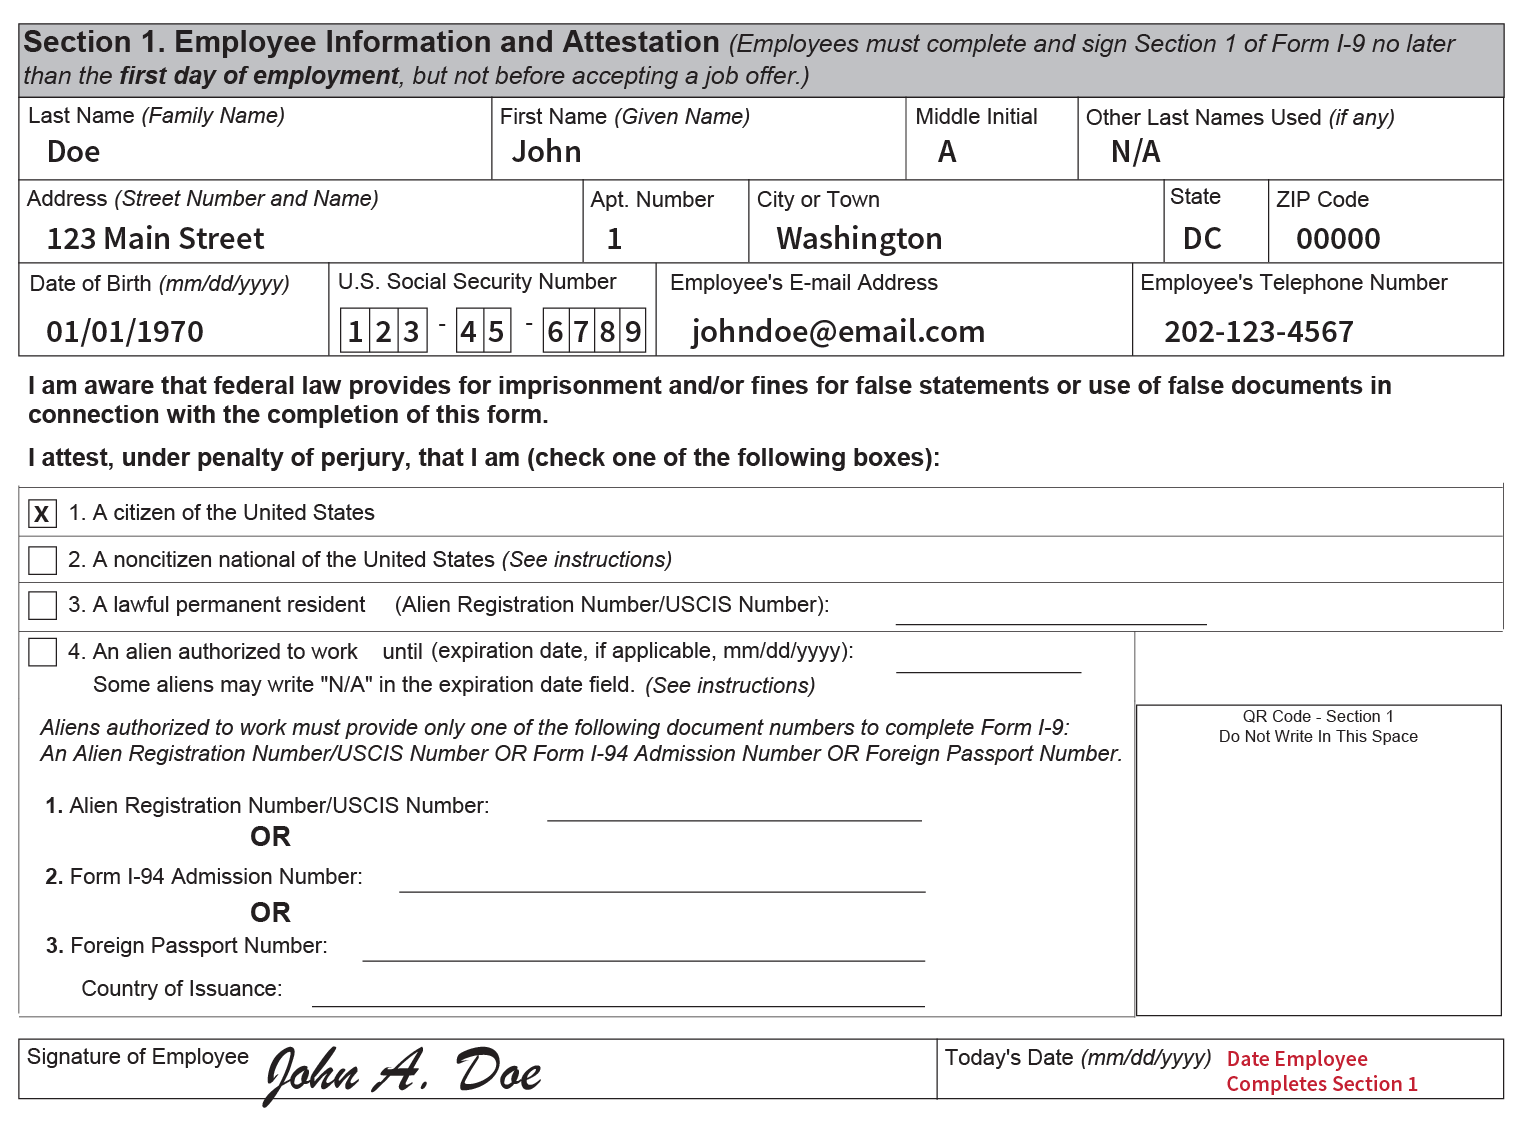 Image of an example Section 1 of Form I-9 completed by a citizen of the United States: The example shows all of the biographical information fields fully completed, and the box next to “A citizen of the United States” checked. The example also shows where the employee must sign, and instructs employees to enter the date they complete Section 1 in the Today’s Date field.